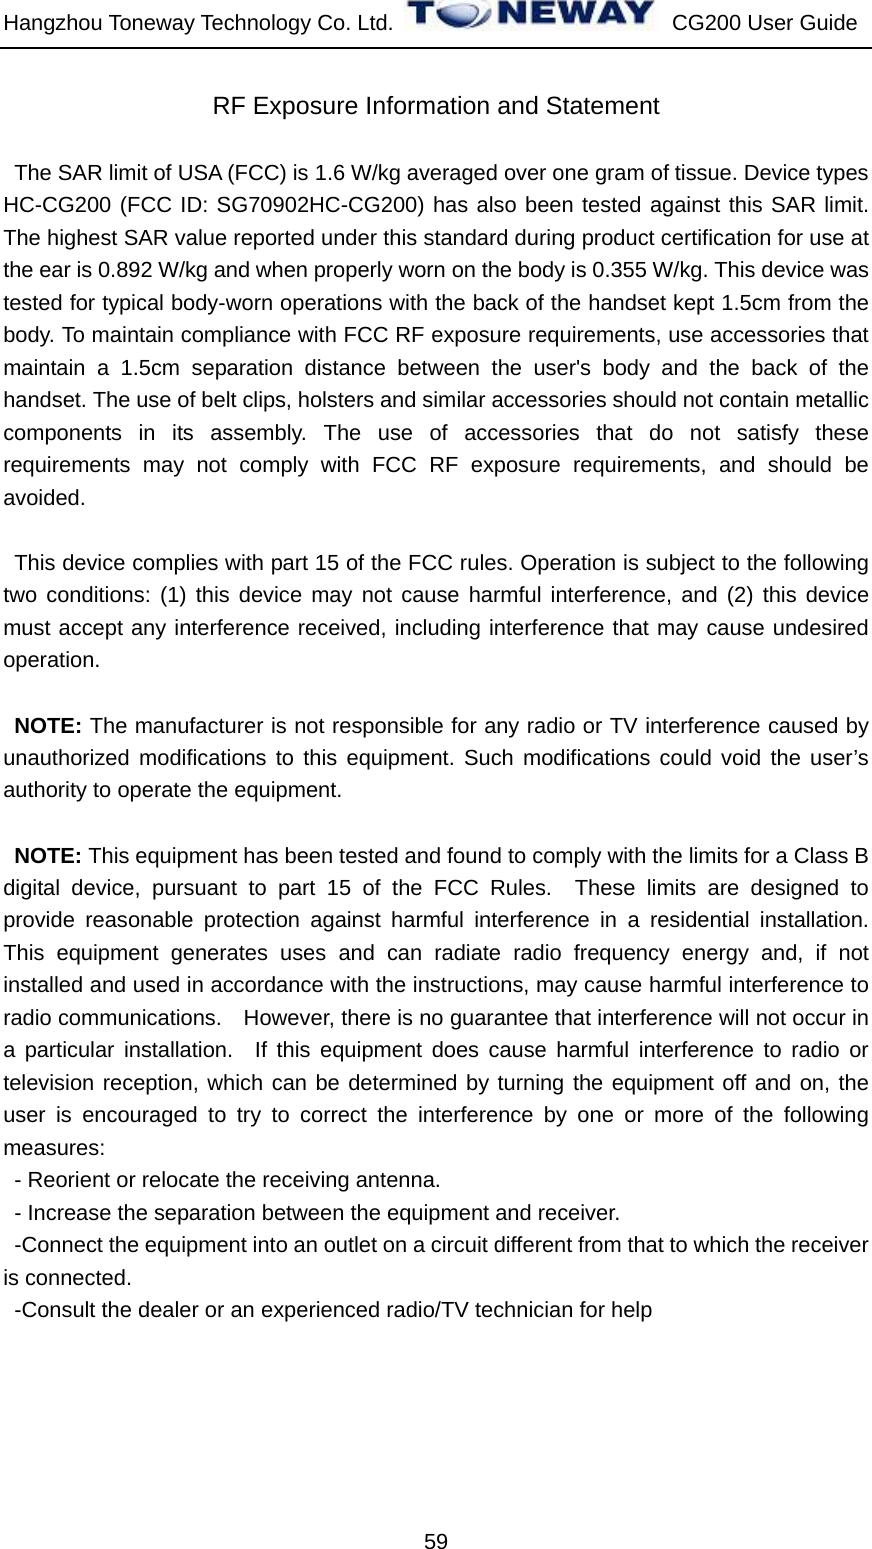 Hangzhou Toneway Technology Co. Ltd.    CG200 User Guide 59 RF Exposure Information and Statement   The SAR limit of USA (FCC) is 1.6 W/kg averaged over one gram of tissue. Device types HC-CG200 (FCC ID: SG70902HC-CG200) has also been tested against this SAR limit. The highest SAR value reported under this standard during product certification for use at the ear is 0.892 W/kg and when properly worn on the body is 0.355 W/kg. This device was tested for typical body-worn operations with the back of the handset kept 1.5cm from the body. To maintain compliance with FCC RF exposure requirements, use accessories that maintain a 1.5cm separation distance between the user&apos;s body and the back of the handset. The use of belt clips, holsters and similar accessories should not contain metallic components in its assembly. The use of accessories that do not satisfy these requirements may not comply with FCC RF exposure requirements, and should be avoided.  This device complies with part 15 of the FCC rules. Operation is subject to the following two conditions: (1) this device may not cause harmful interference, and (2) this device must accept any interference received, including interference that may cause undesired operation.  NOTE: The manufacturer is not responsible for any radio or TV interference caused by unauthorized modifications to this equipment. Such modifications could void the user’s authority to operate the equipment.  NOTE: This equipment has been tested and found to comply with the limits for a Class B digital device, pursuant to part 15 of the FCC Rules.  These limits are designed to provide reasonable protection against harmful interference in a residential installation.  This equipment generates uses and can radiate radio frequency energy and, if not installed and used in accordance with the instructions, may cause harmful interference to radio communications.    However, there is no guarantee that interference will not occur in a particular installation.  If this equipment does cause harmful interference to radio or television reception, which can be determined by turning the equipment off and on, the user is encouraged to try to correct the interference by one or more of the following measures: - Reorient or relocate the receiving antenna. - Increase the separation between the equipment and receiver. -Connect the equipment into an outlet on a circuit different from that to which the receiver is connected. -Consult the dealer or an experienced radio/TV technician for help   